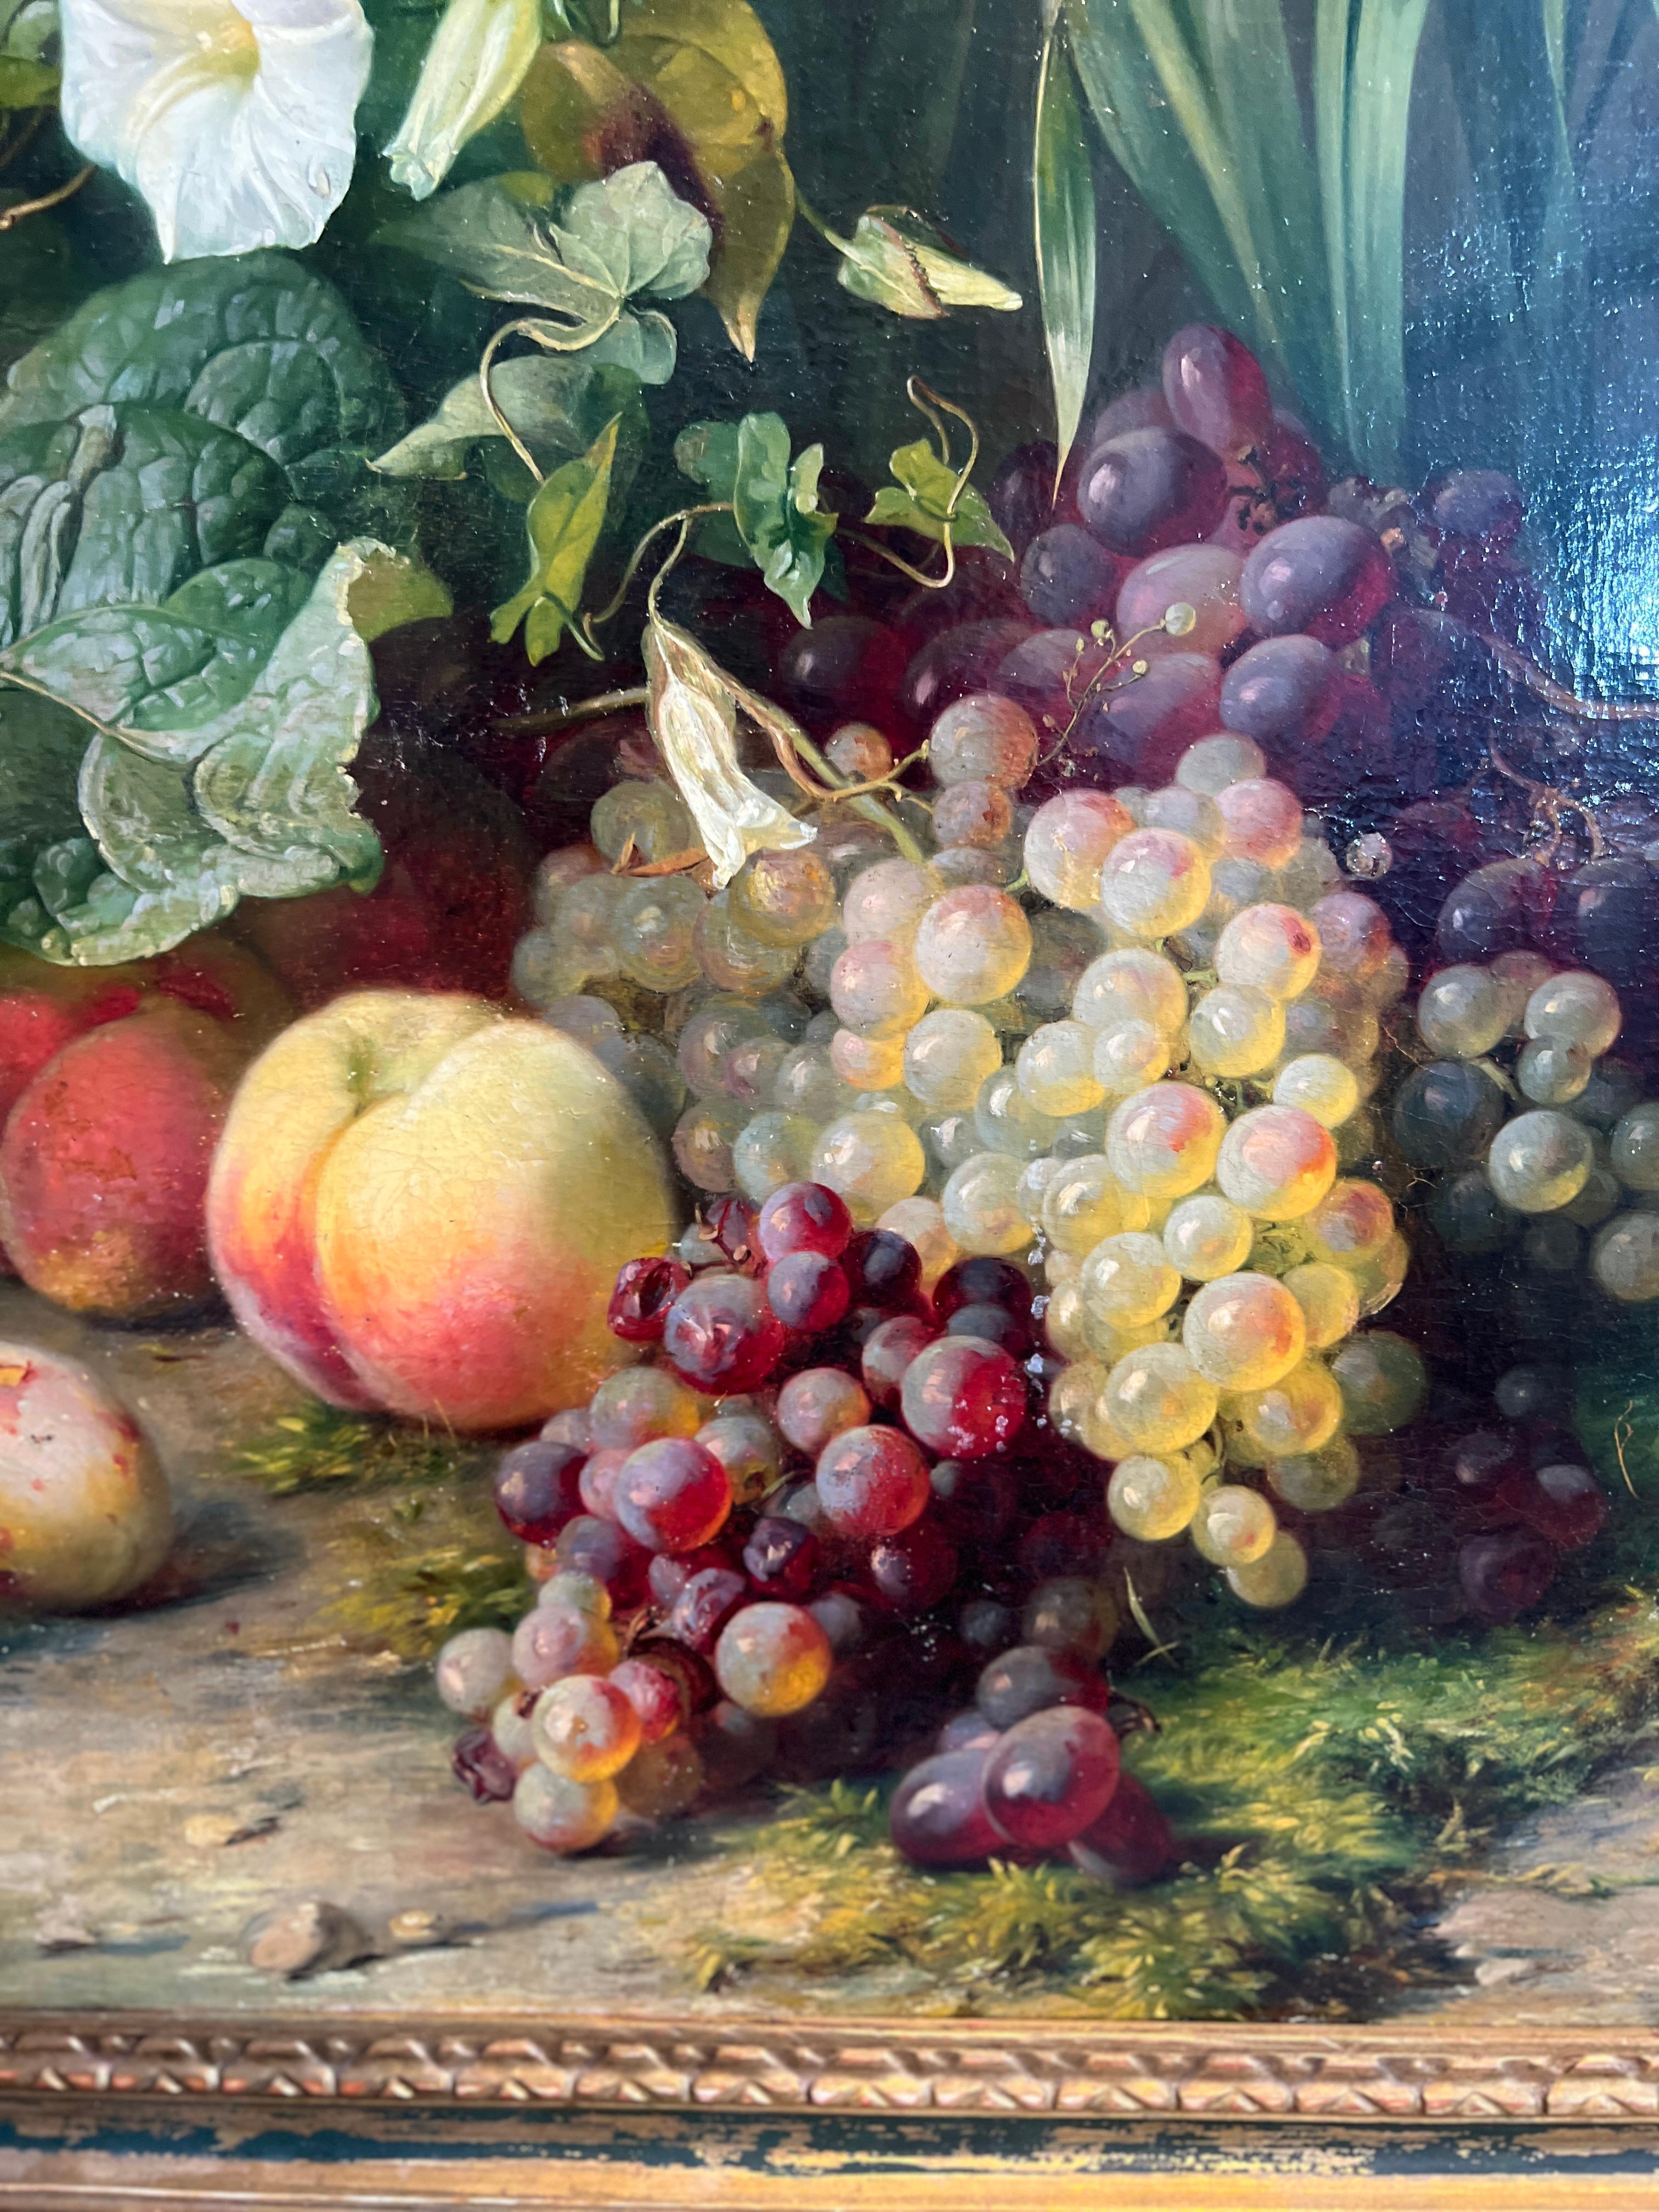 Elise Puyroche-Wagner (German, 1828-1895), circa 1853. Oil on Canvas in Giltwood Frame. 

An extremely fine painting featuring a naturalist floral scene, flowers, grapes, peaches, an adorable bee to lower left and mosquito to the left lower leaf.